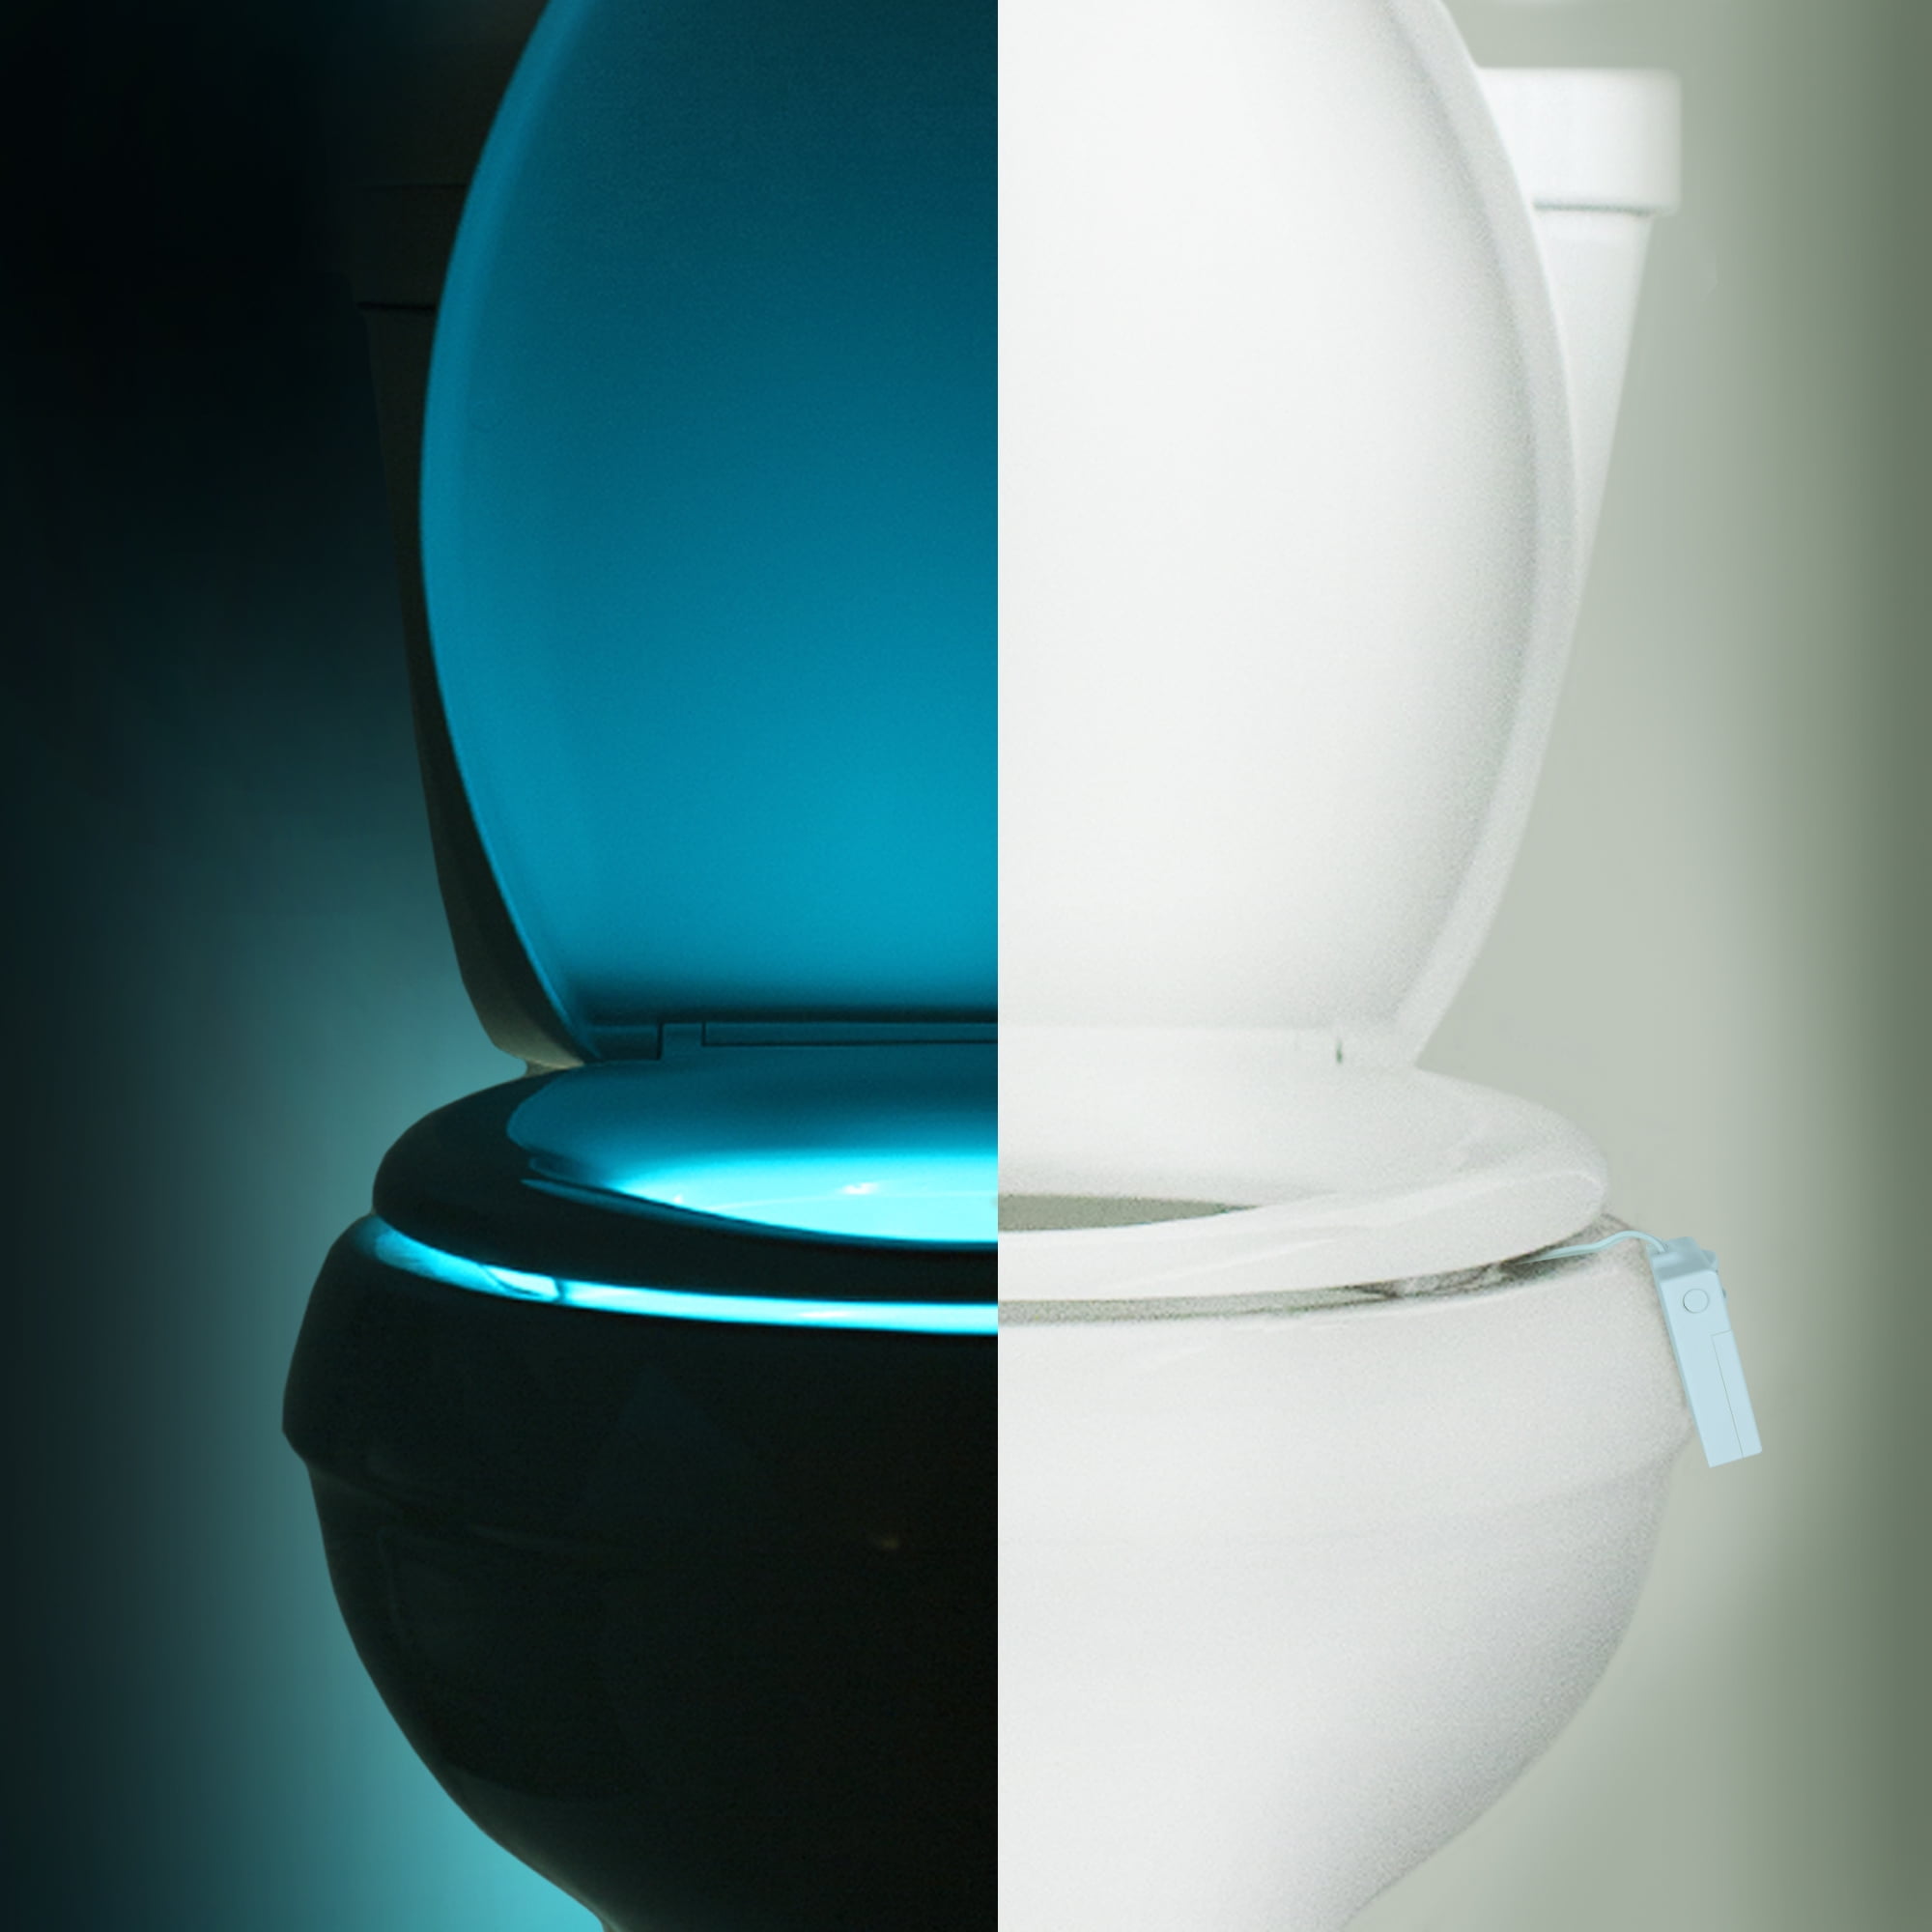 IllumiBowl turns your toilet into a color-changing party light - CNET